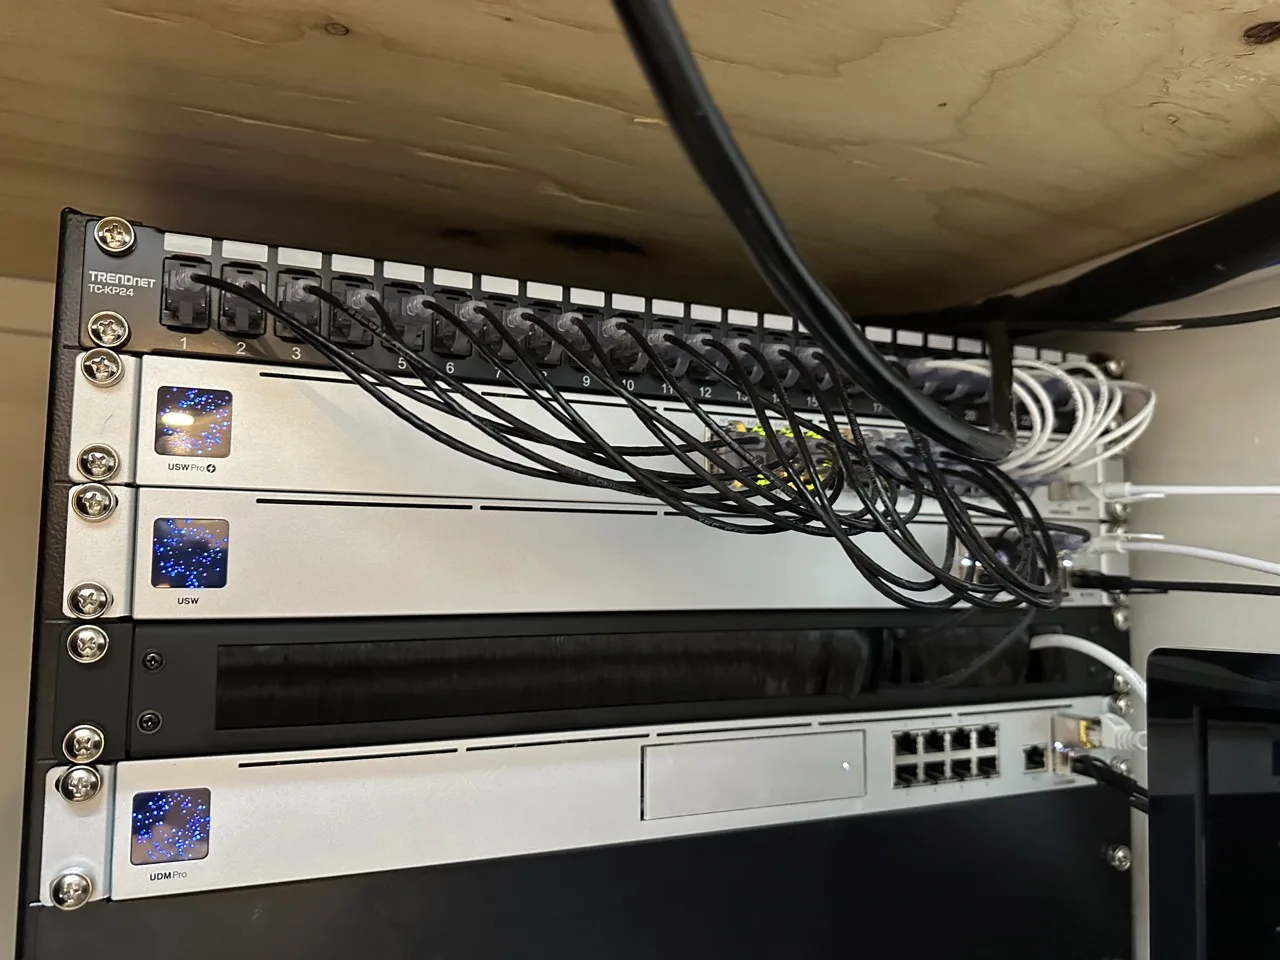 Home Networking Install using Unifi Network and Protect from Ubiquiti